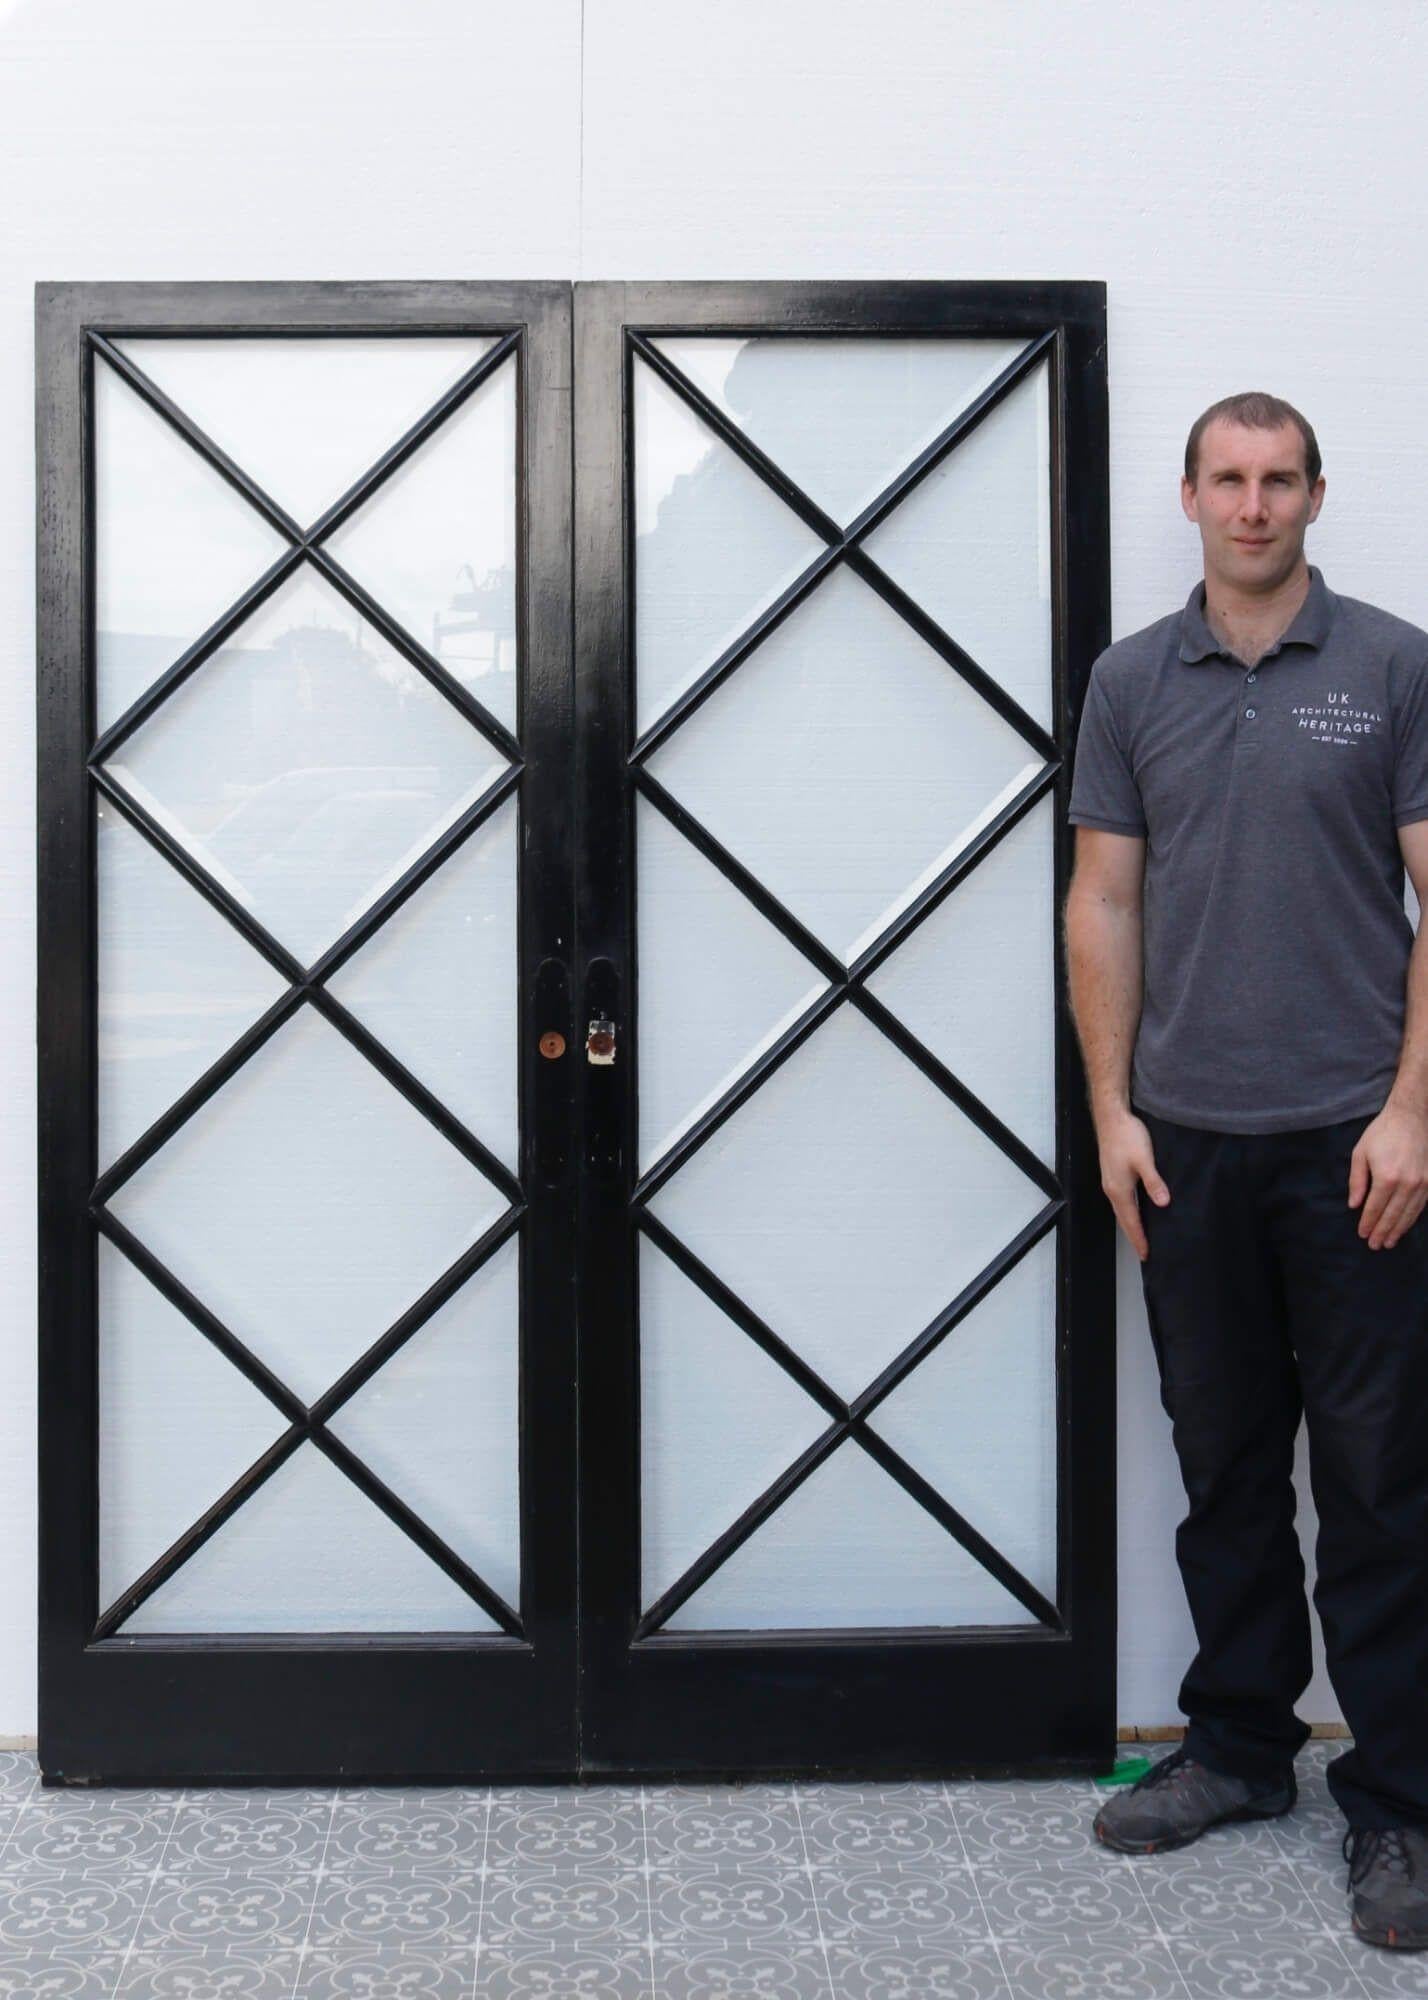 Dating from the 1950s, this pair of reclaimed glazed internal doors make a stylish set of dividing doors. Channelling a mid-century look, they are striking double doors for a modern interior, making a statement with their geometric diamond-shaped,